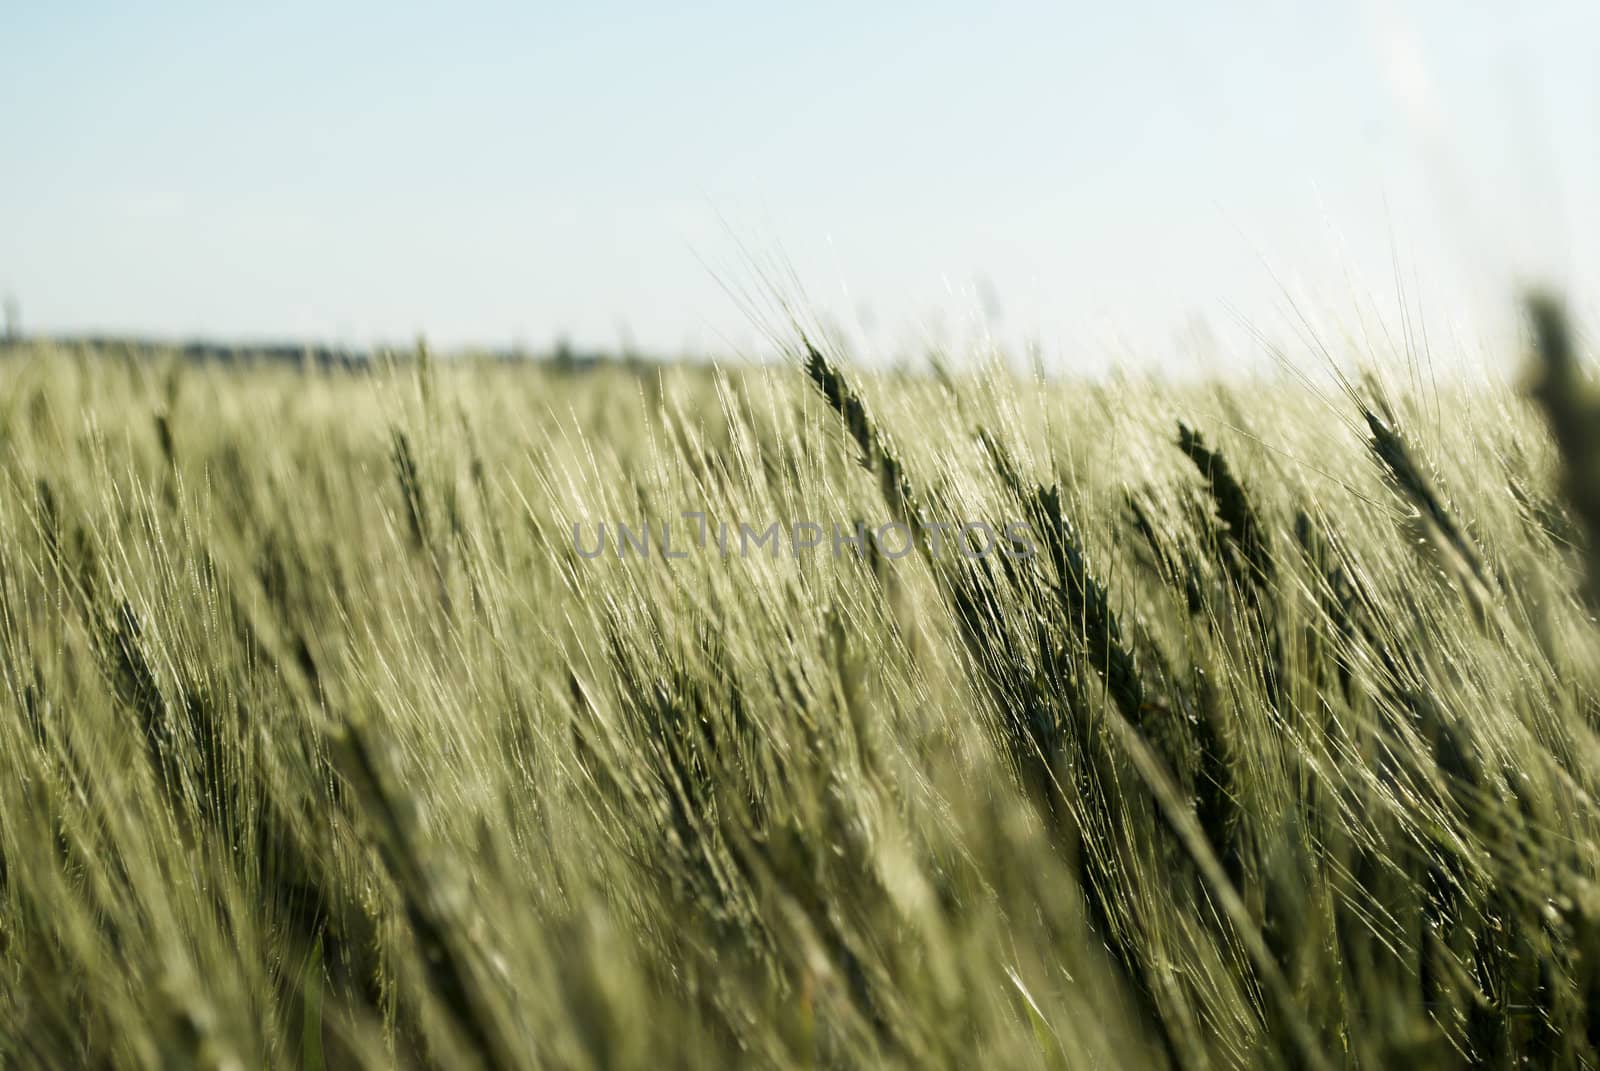 immature wheat  field  on  a background of blue sky